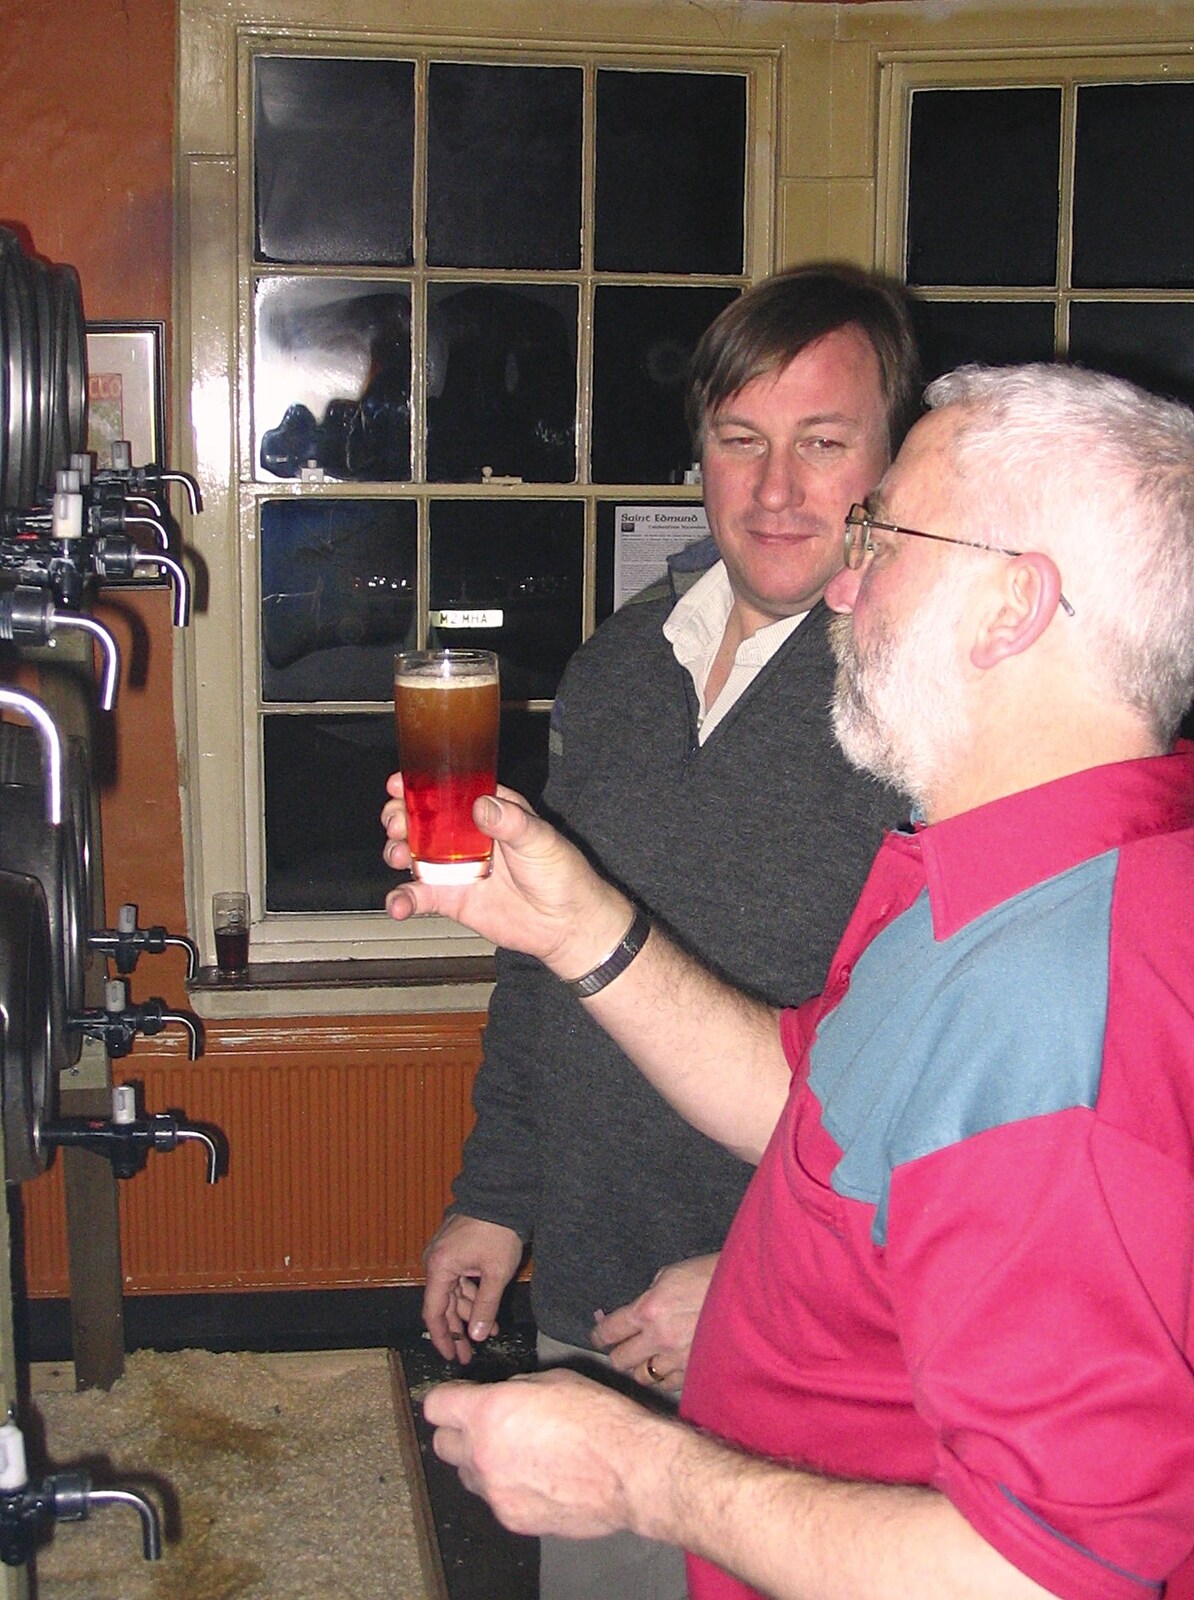 A beer is surveyed from The Hoxne Swan Beer Festival, Hoxne, Suffolk - 20th November 2004